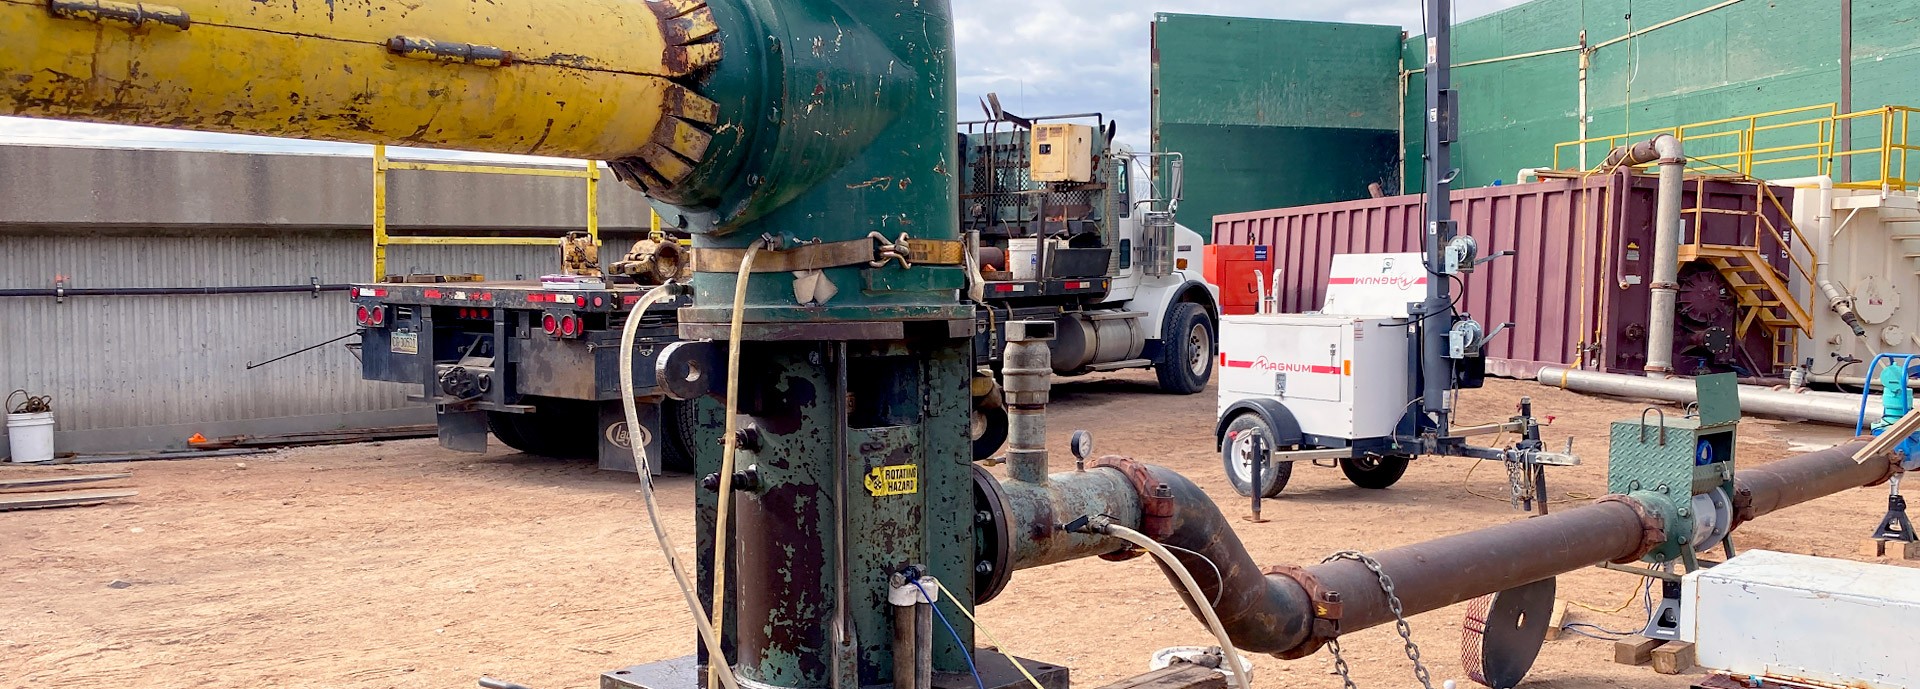 close up of pipes and equipment at well site